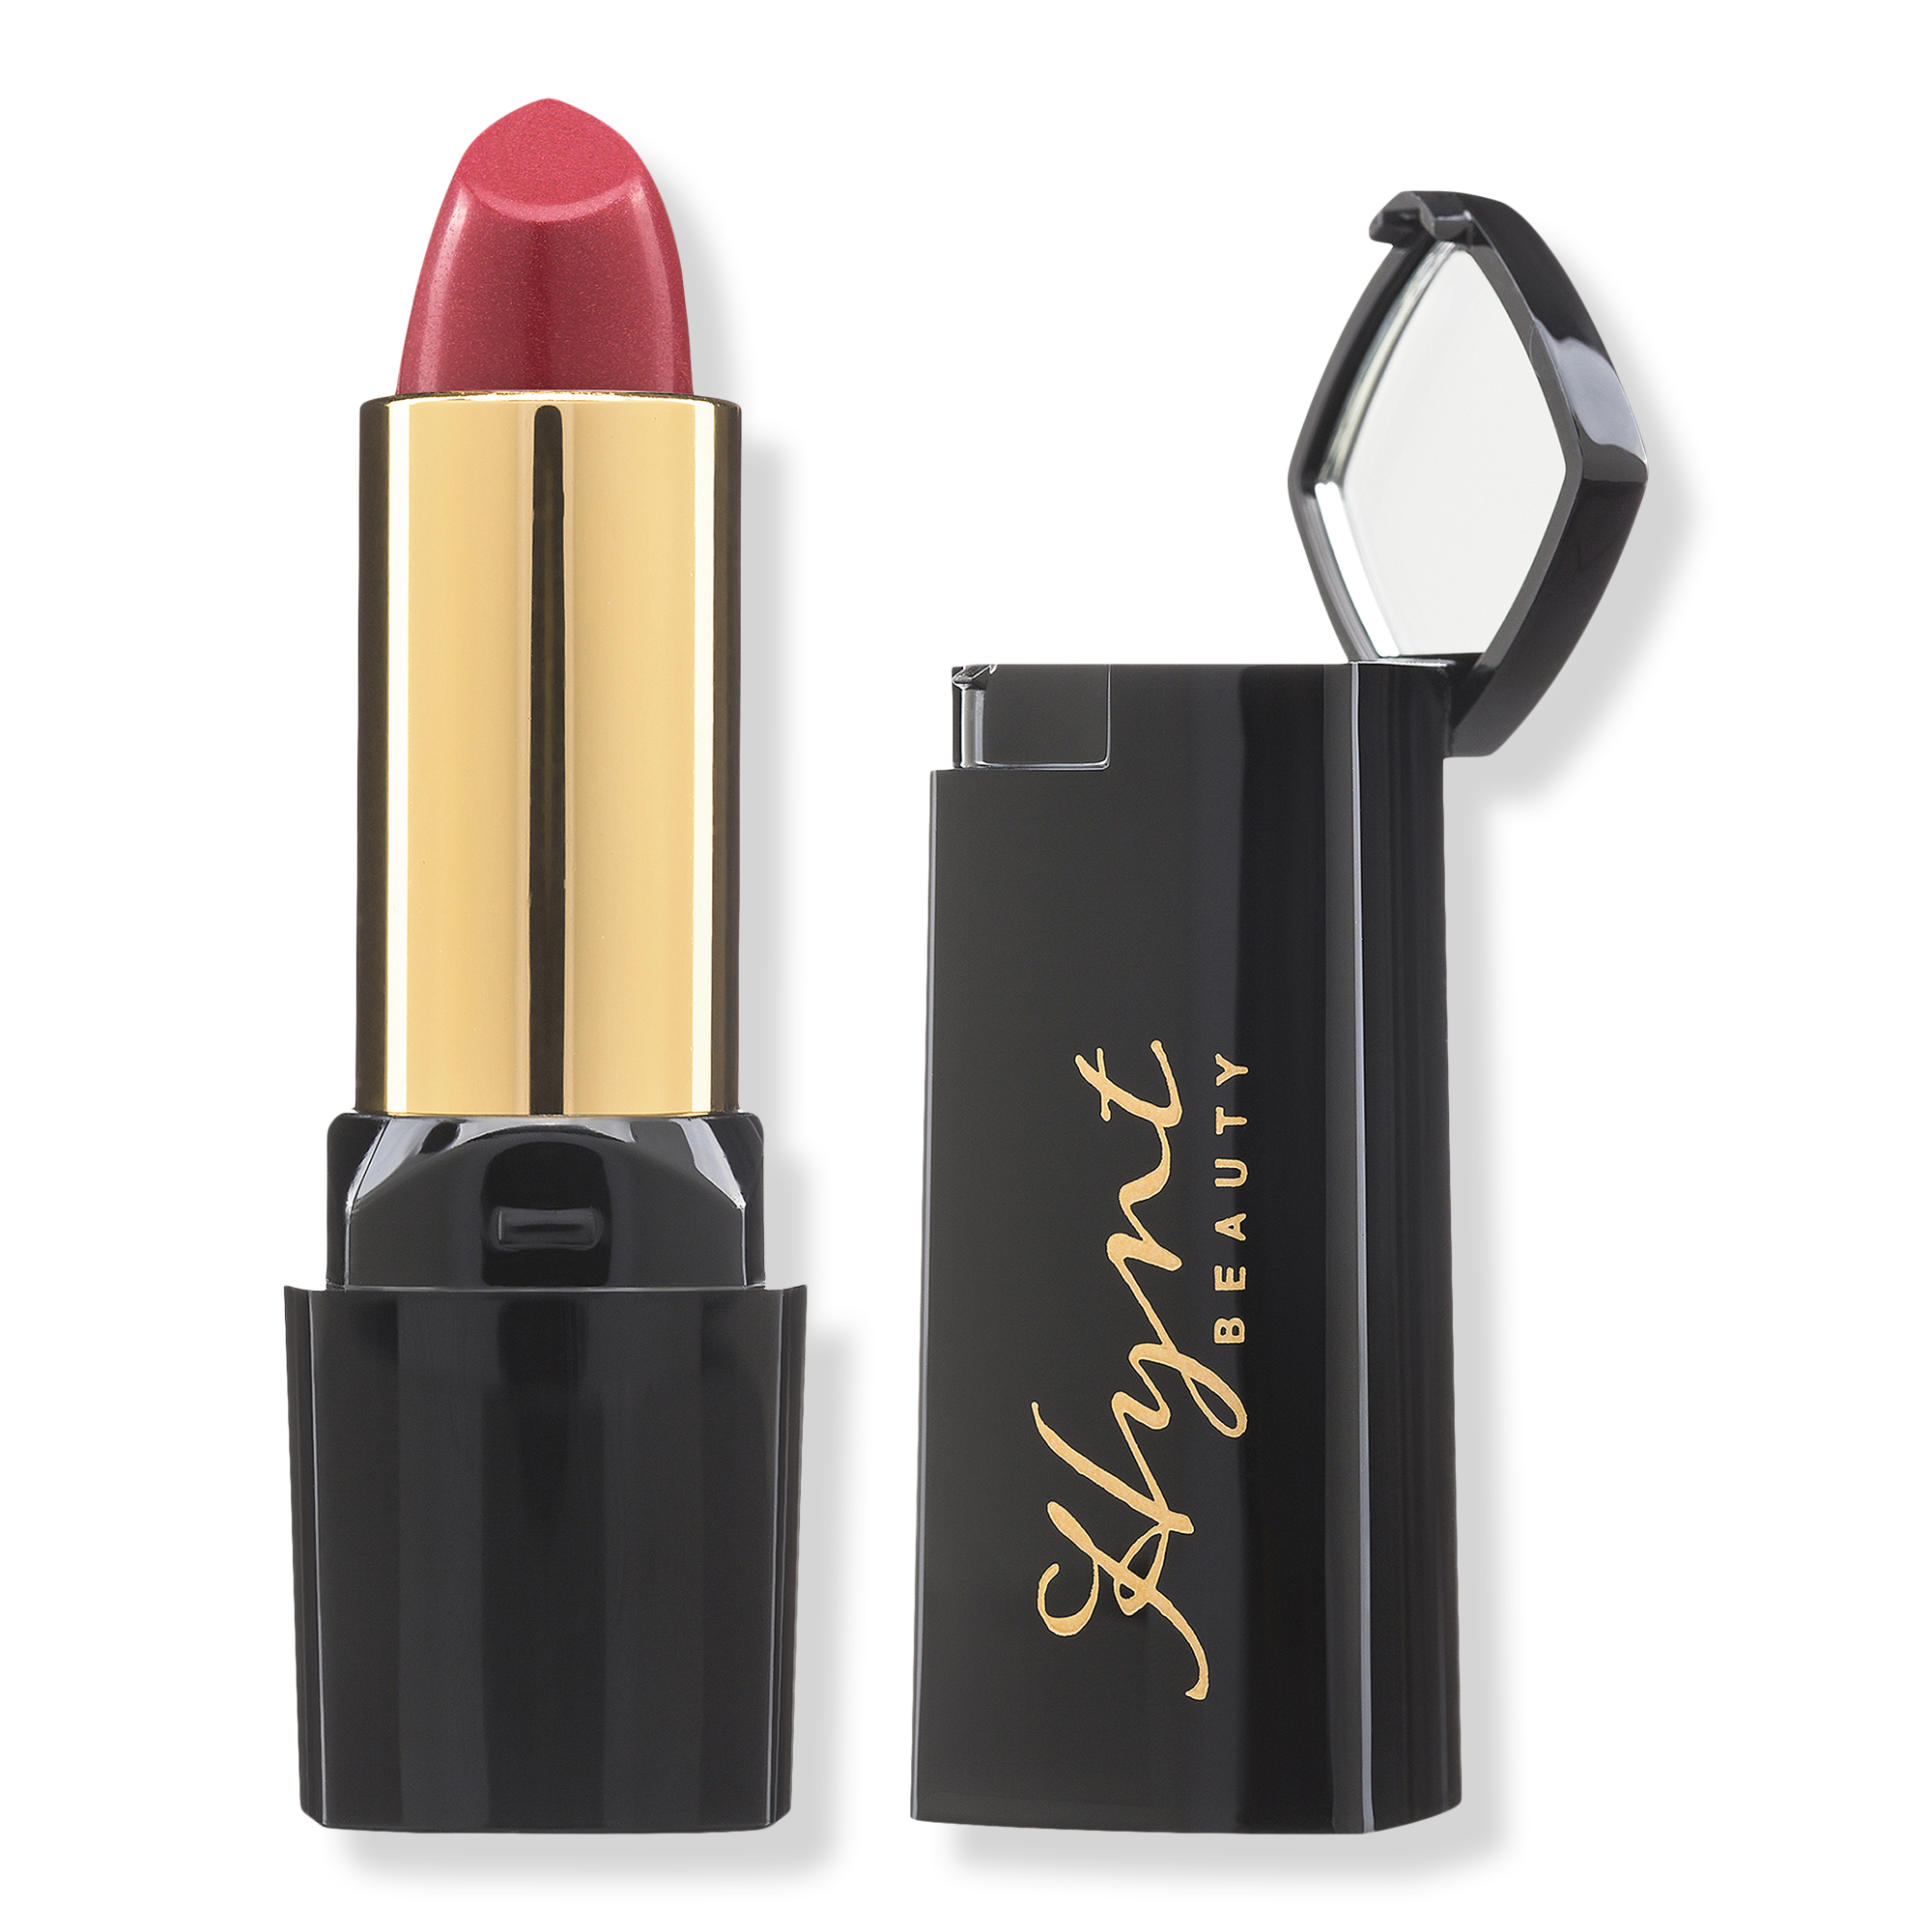 Load image into Gallery viewer, Hynt Beauty Aria Pure Lipstick
